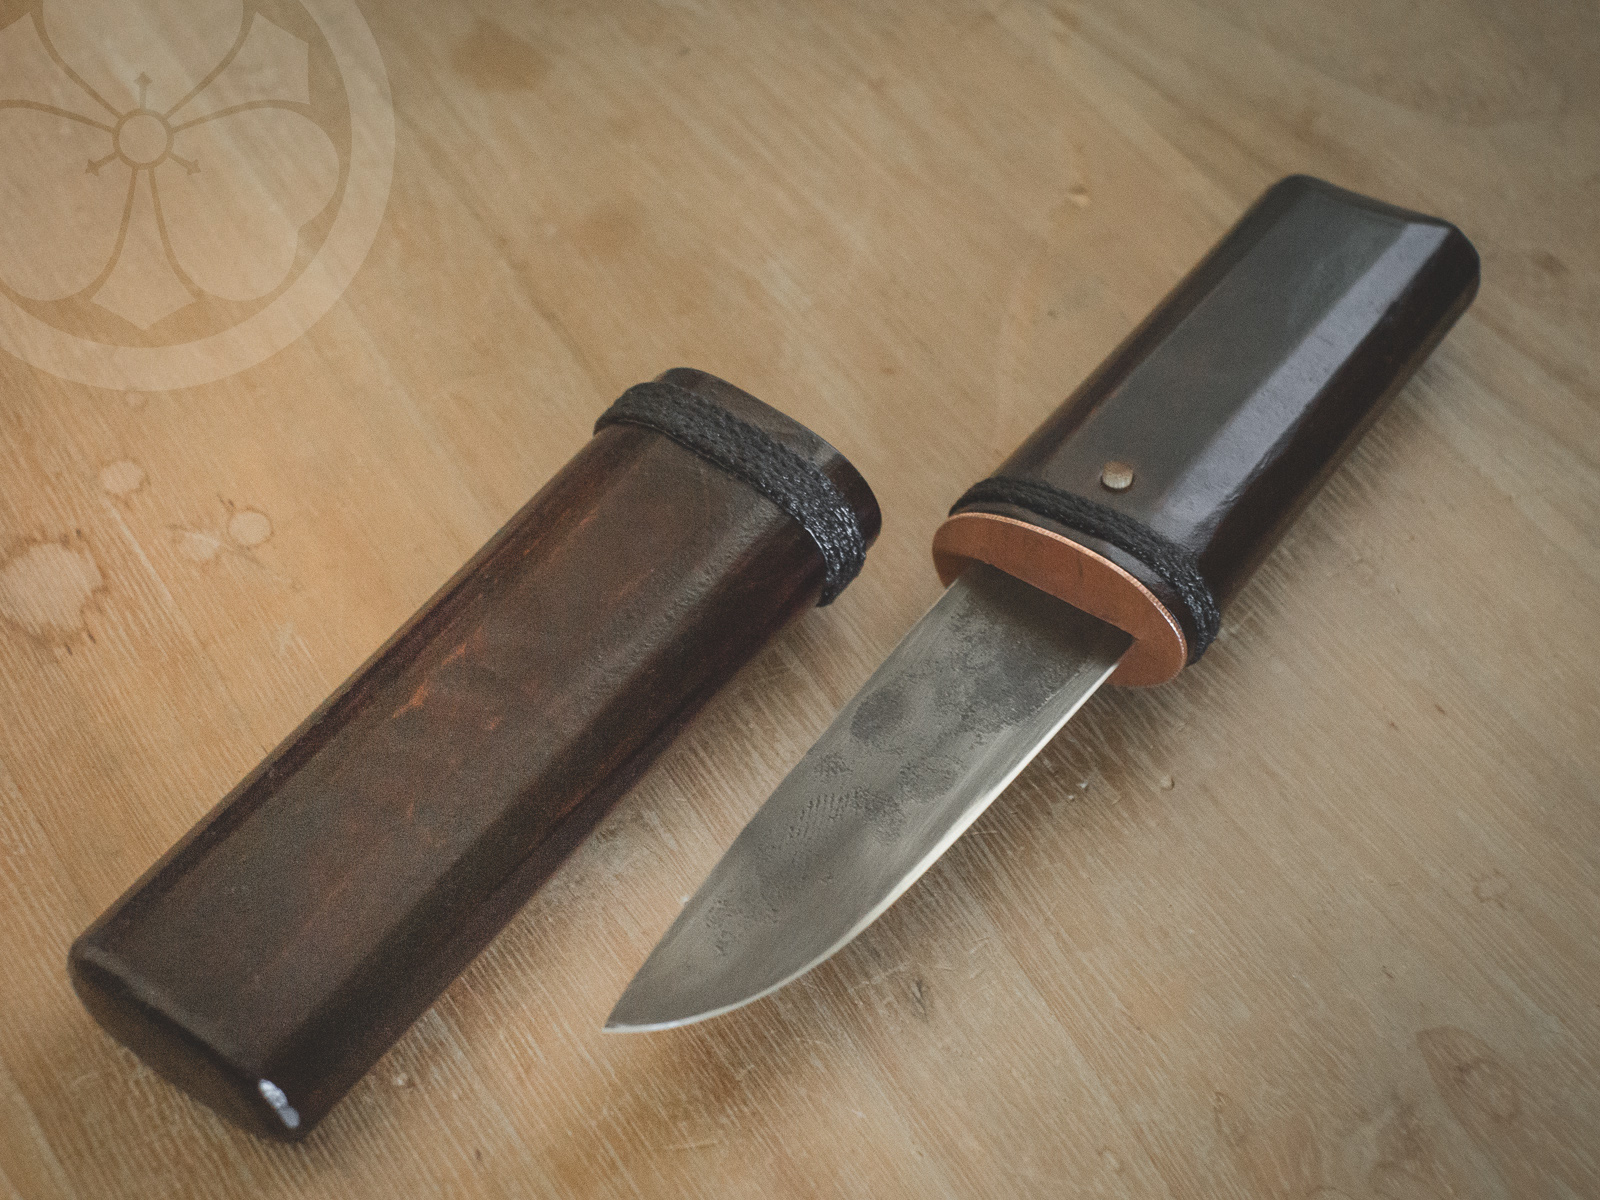 Island Blacksmith: Charcoal forged knives from reclaimed files.